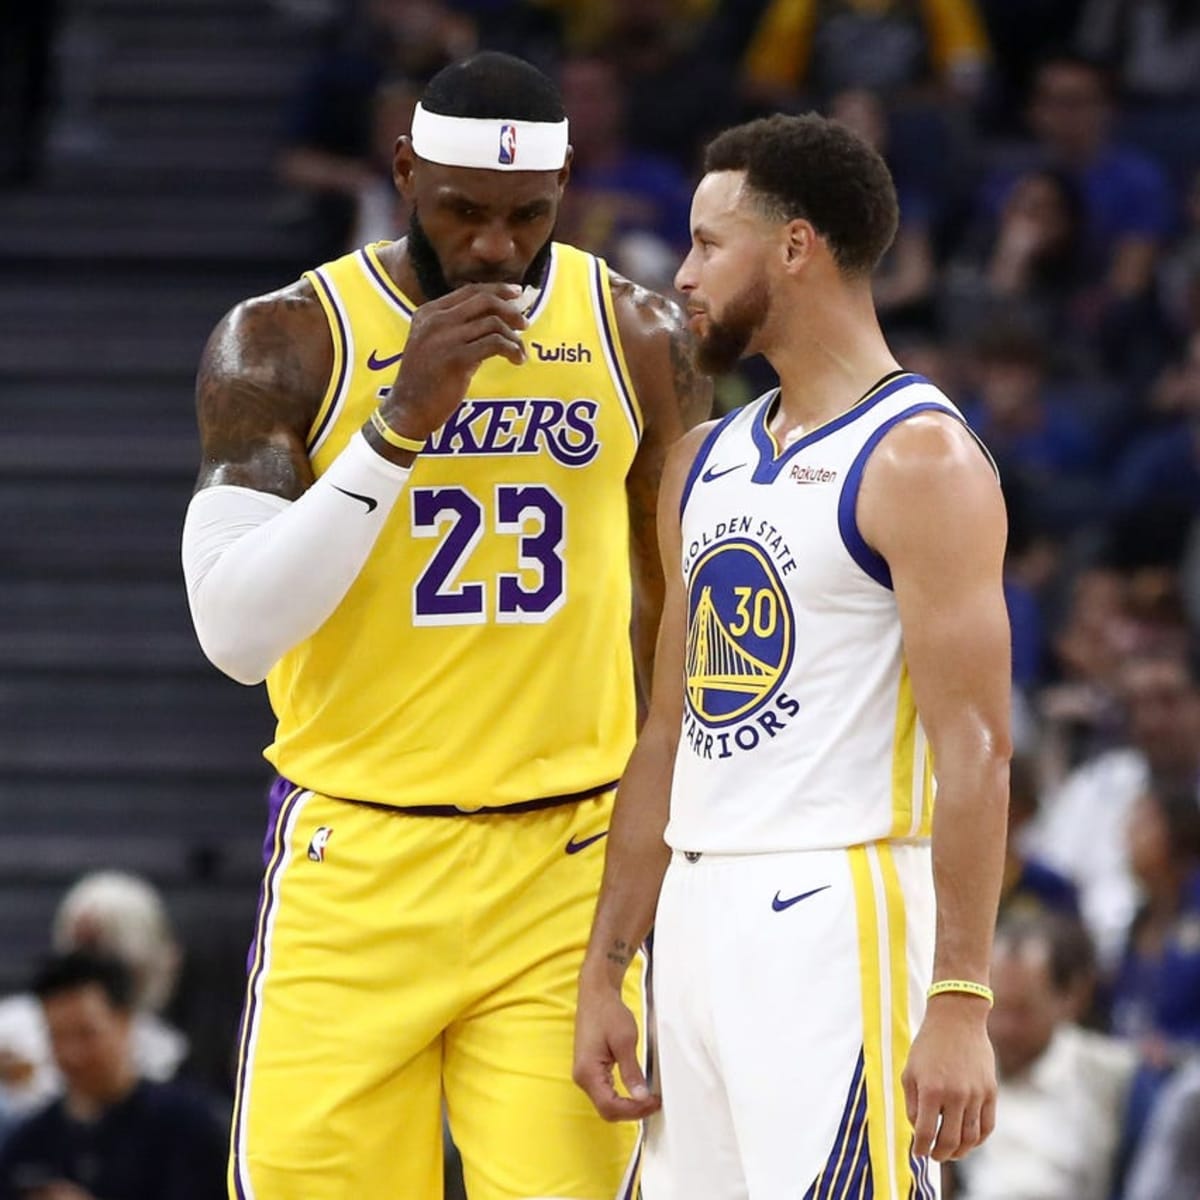 Stephen Curry vs. LeBron James: All About the NBA Rivals